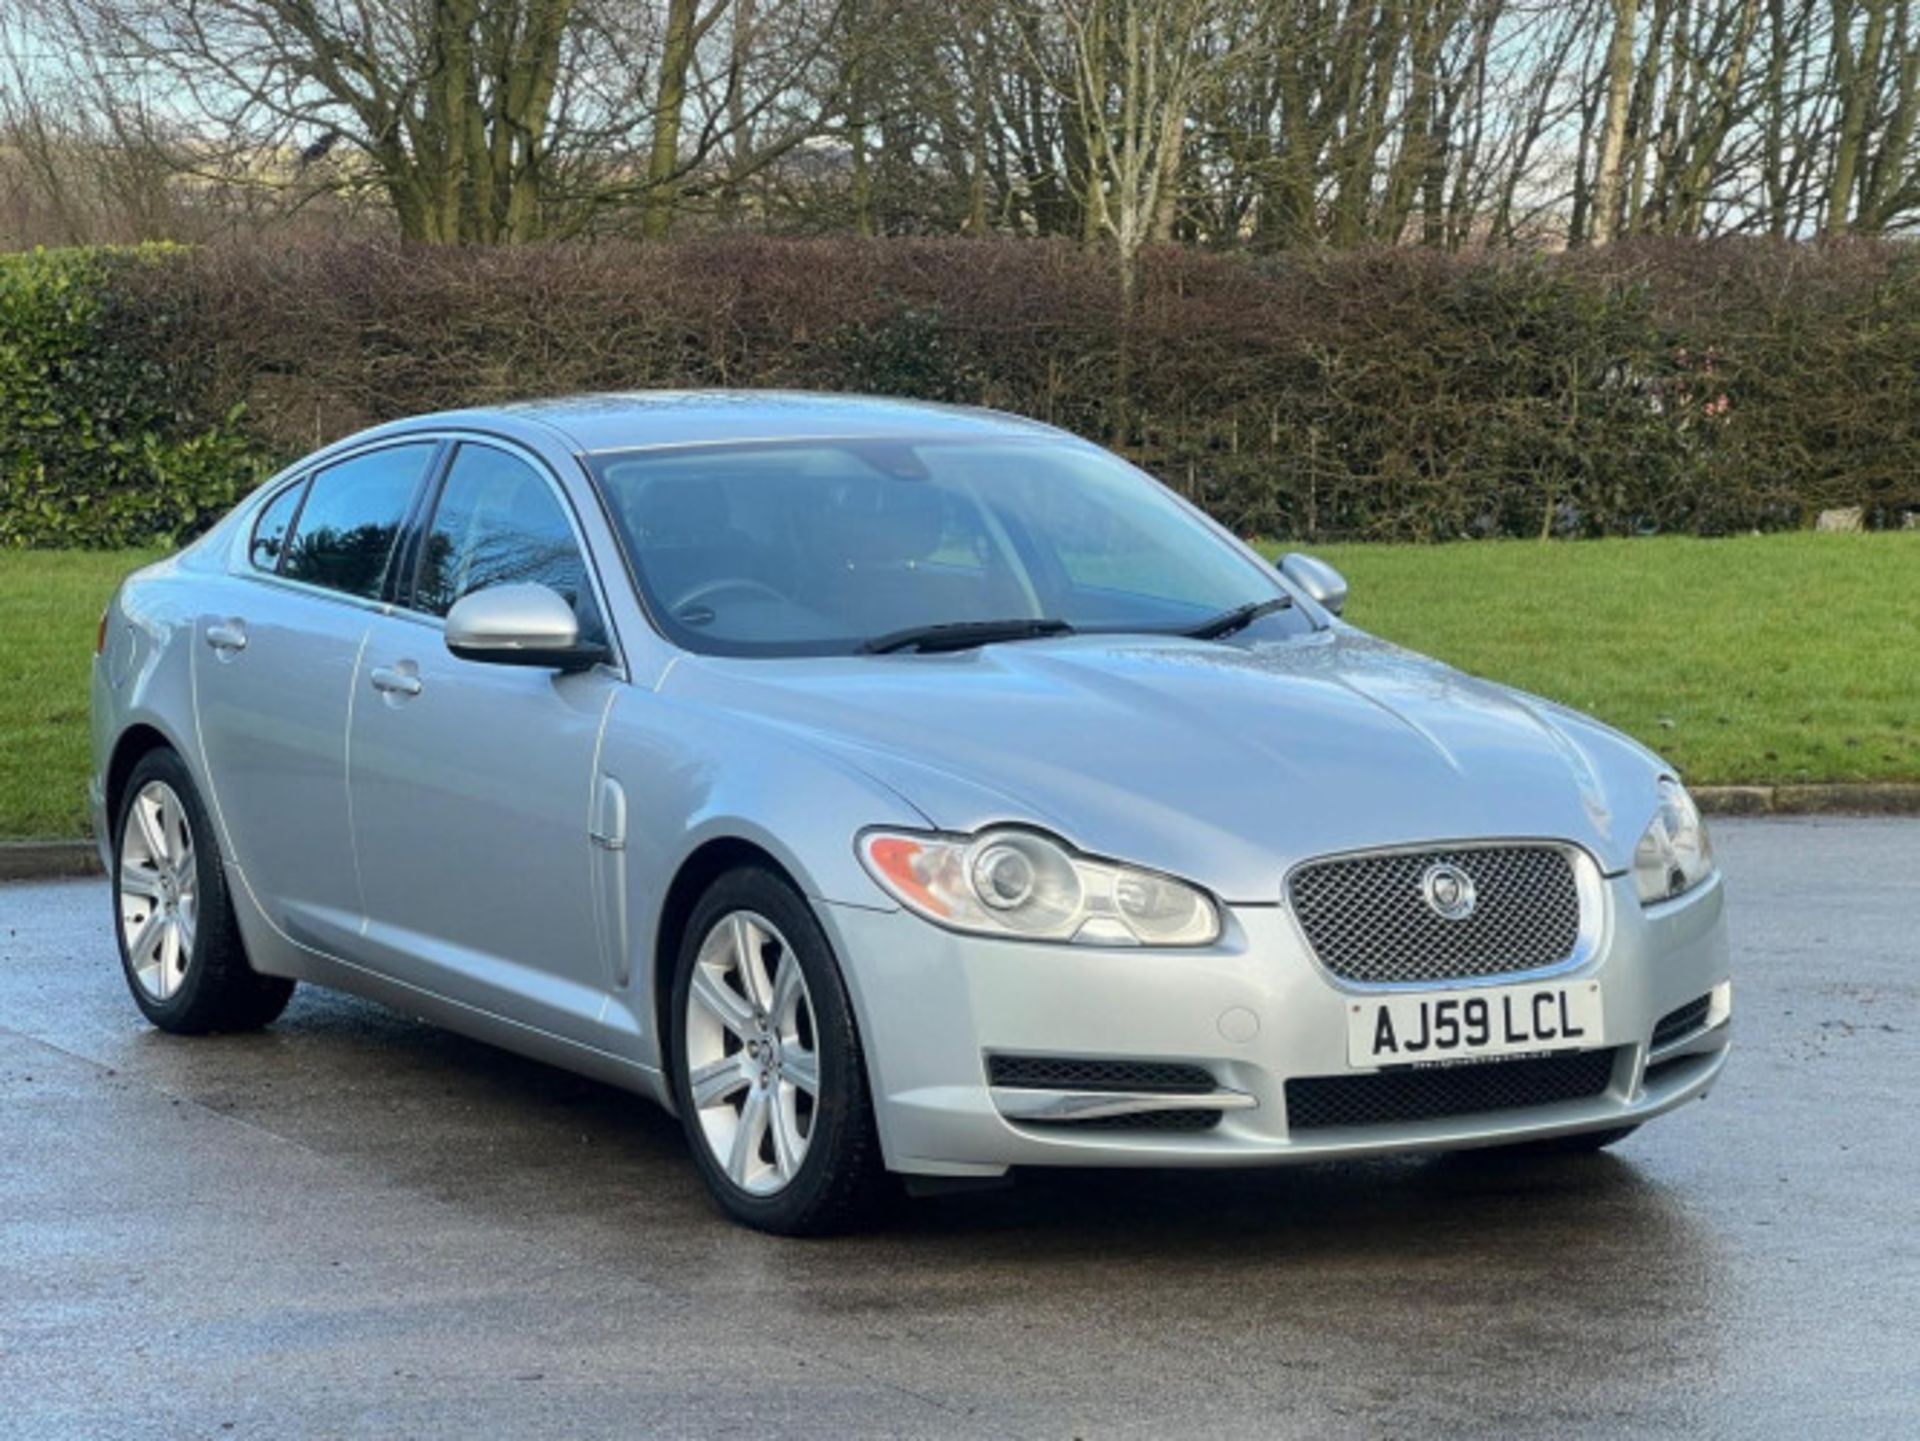 LUXURIOUS JAGUAR XF 3.0D V6 LUXURY 4DR AUTOMATIC SALOON >>--NO VAT ON HAMMER--<< - Image 79 of 80